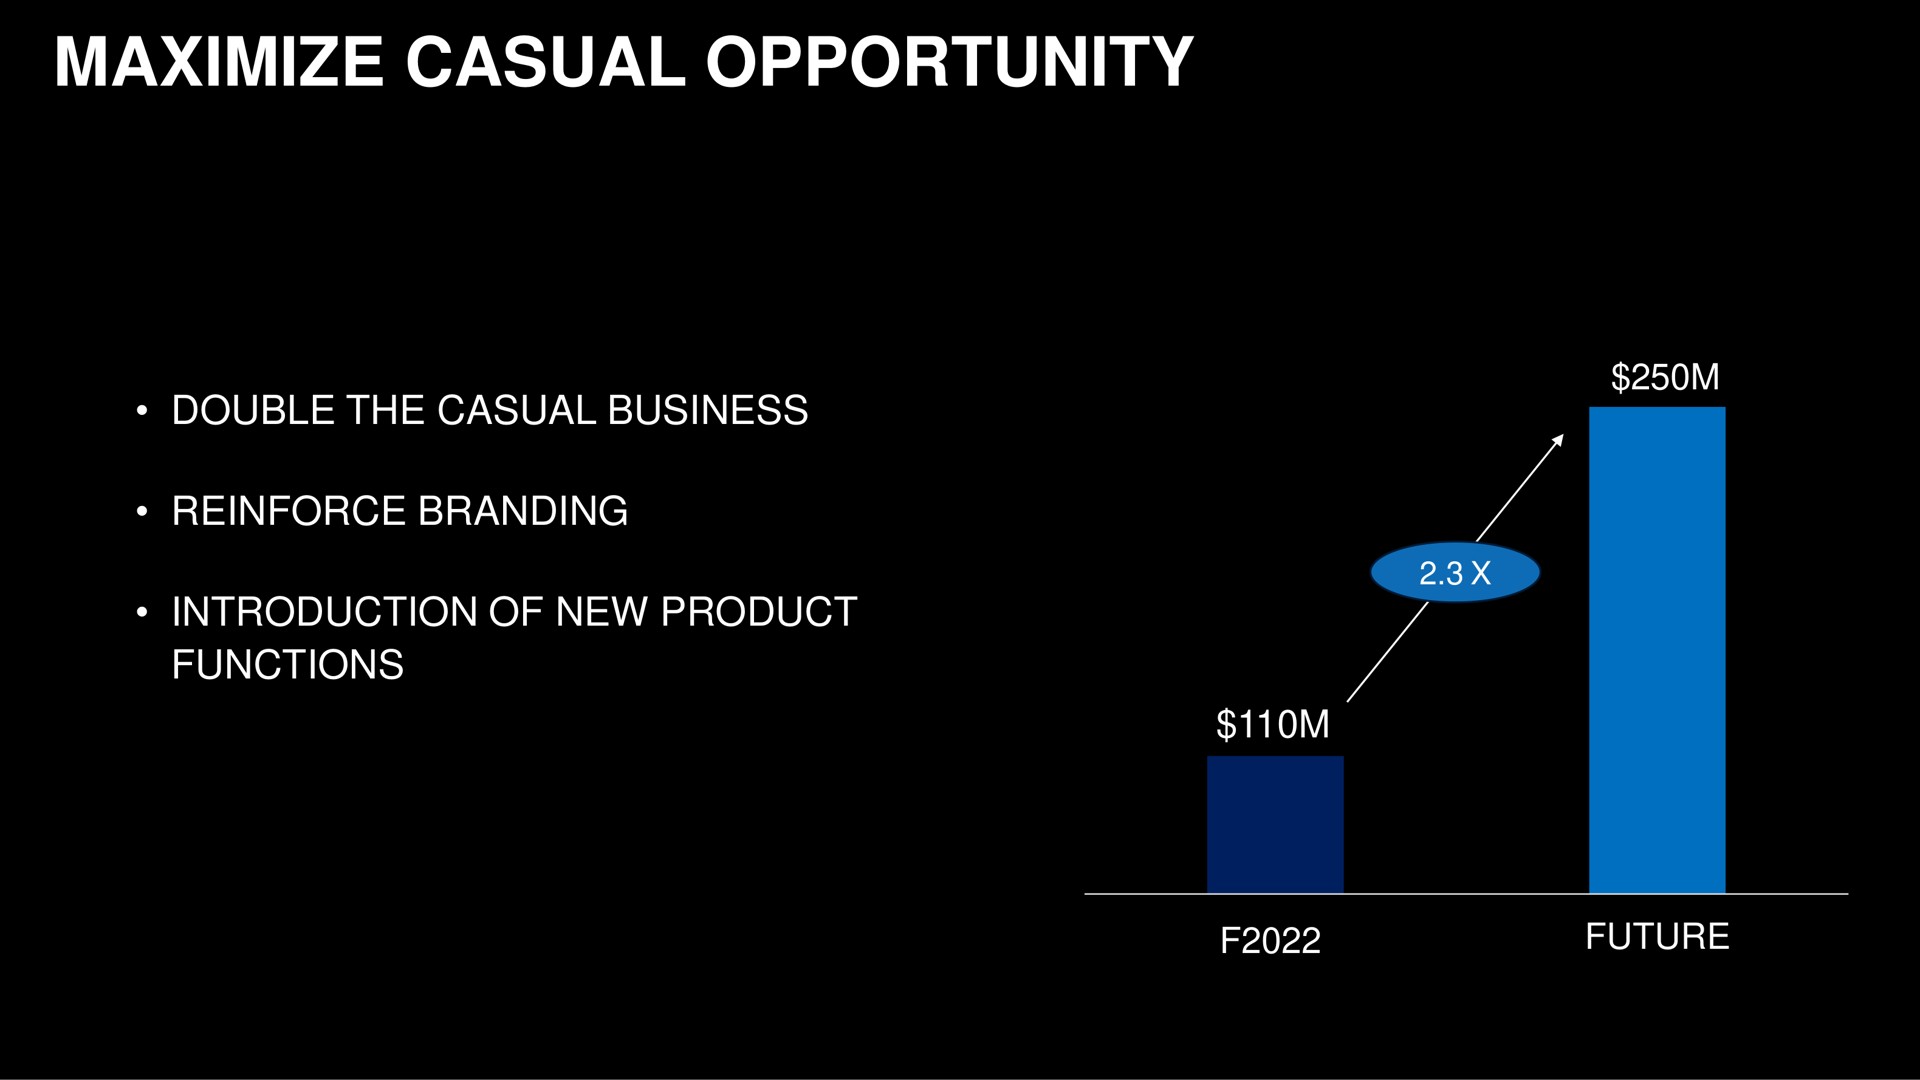 maximize casual opportunity double the business reinforce branding introduction of new product functions same future | Capri Holdings